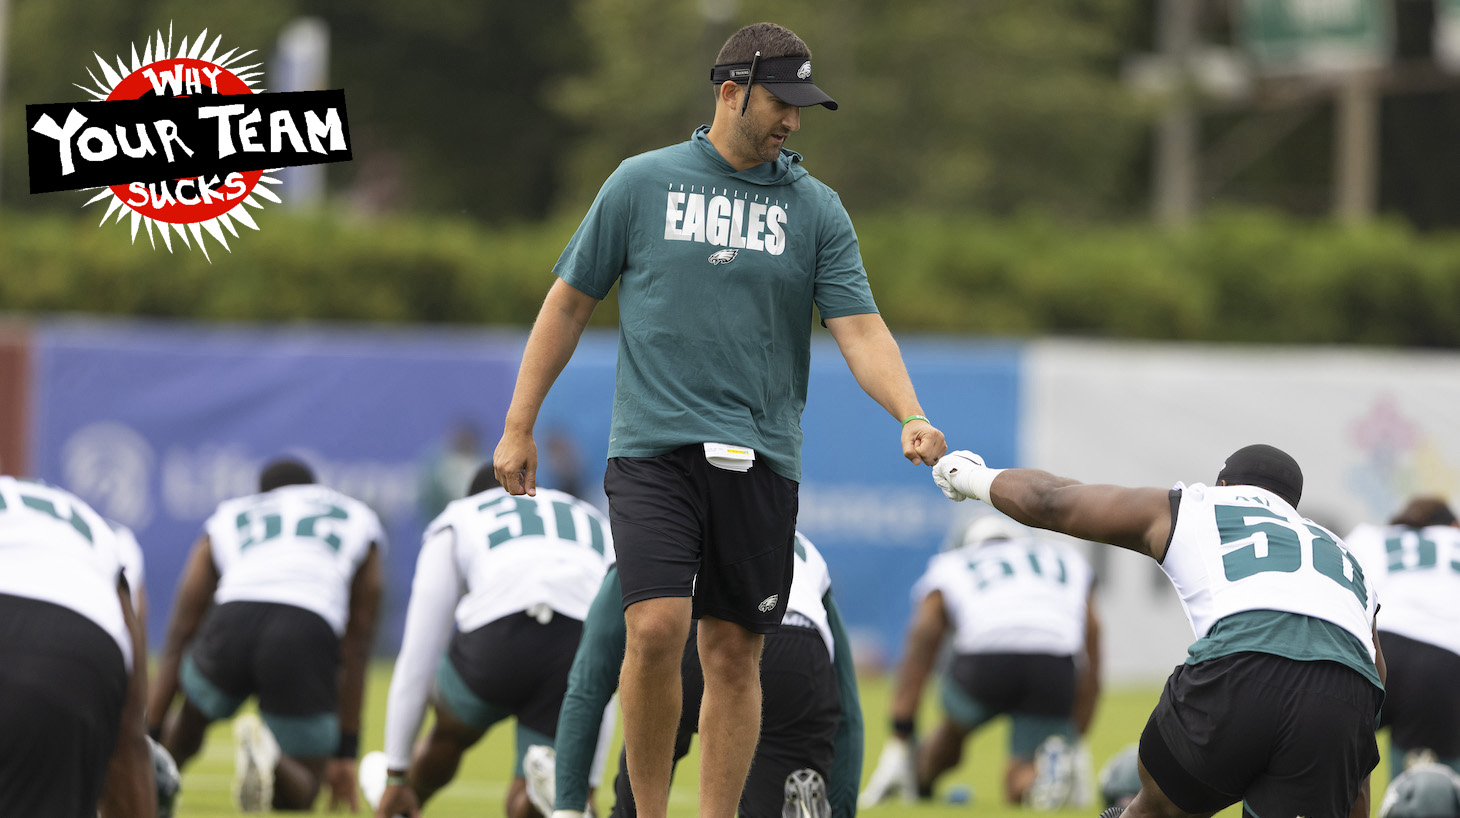 PHILADELPHIA, PA - JULY 29: Head coach Nick Sirianni of the Philadelphia Eagles fist bumps Genard Avery #58 during training camp at the NovaCare Complex on July 29, 2021 in Philadelphia, Pennsylvania. (Photo by Mitchell Leff/Getty Images)